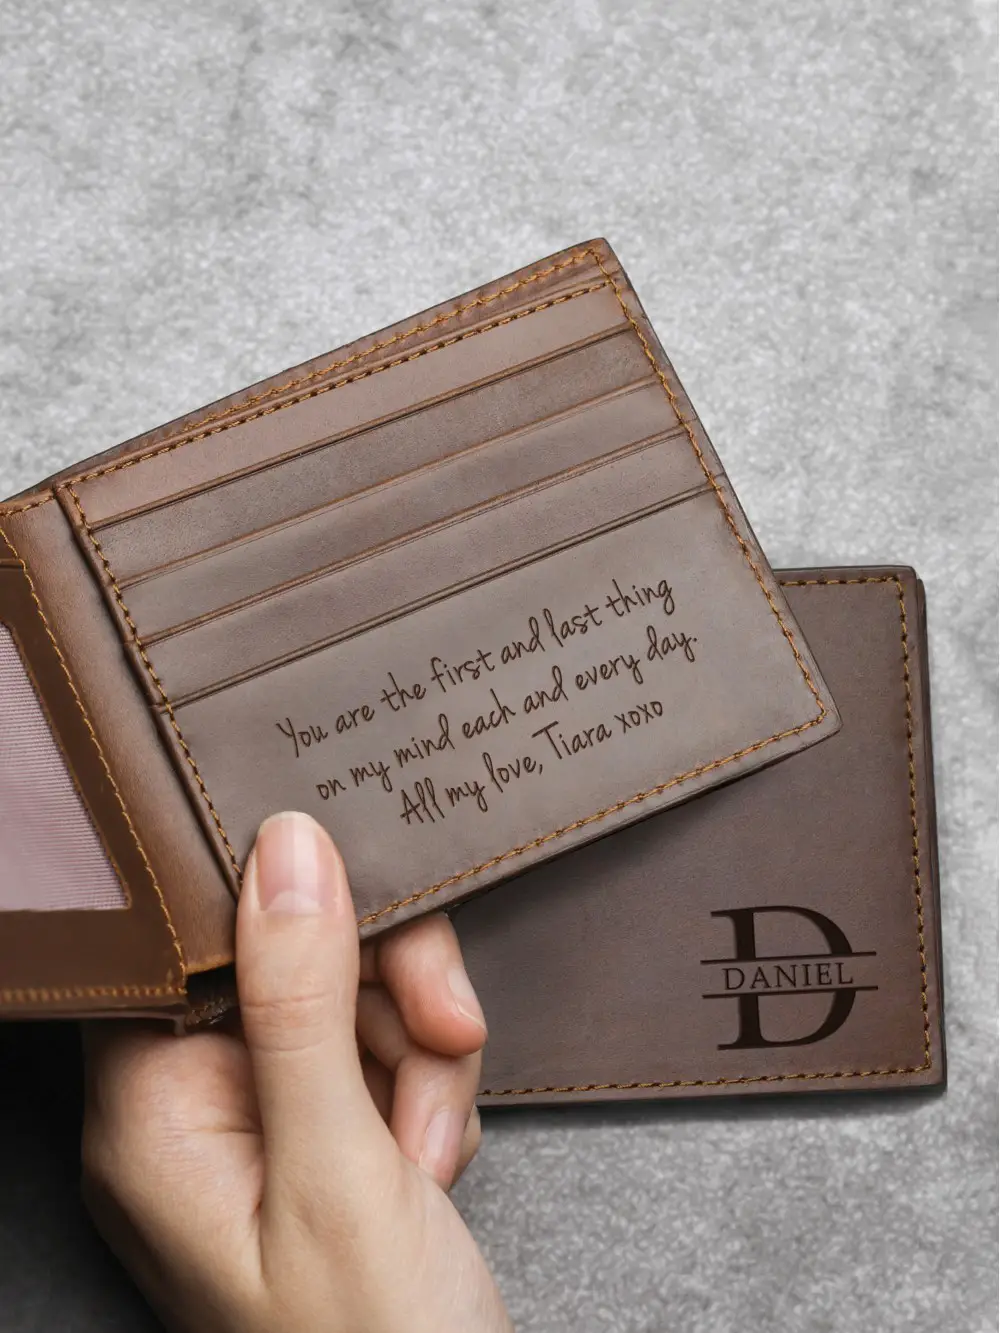 Valentine's Day gift ideas a personalized wallet